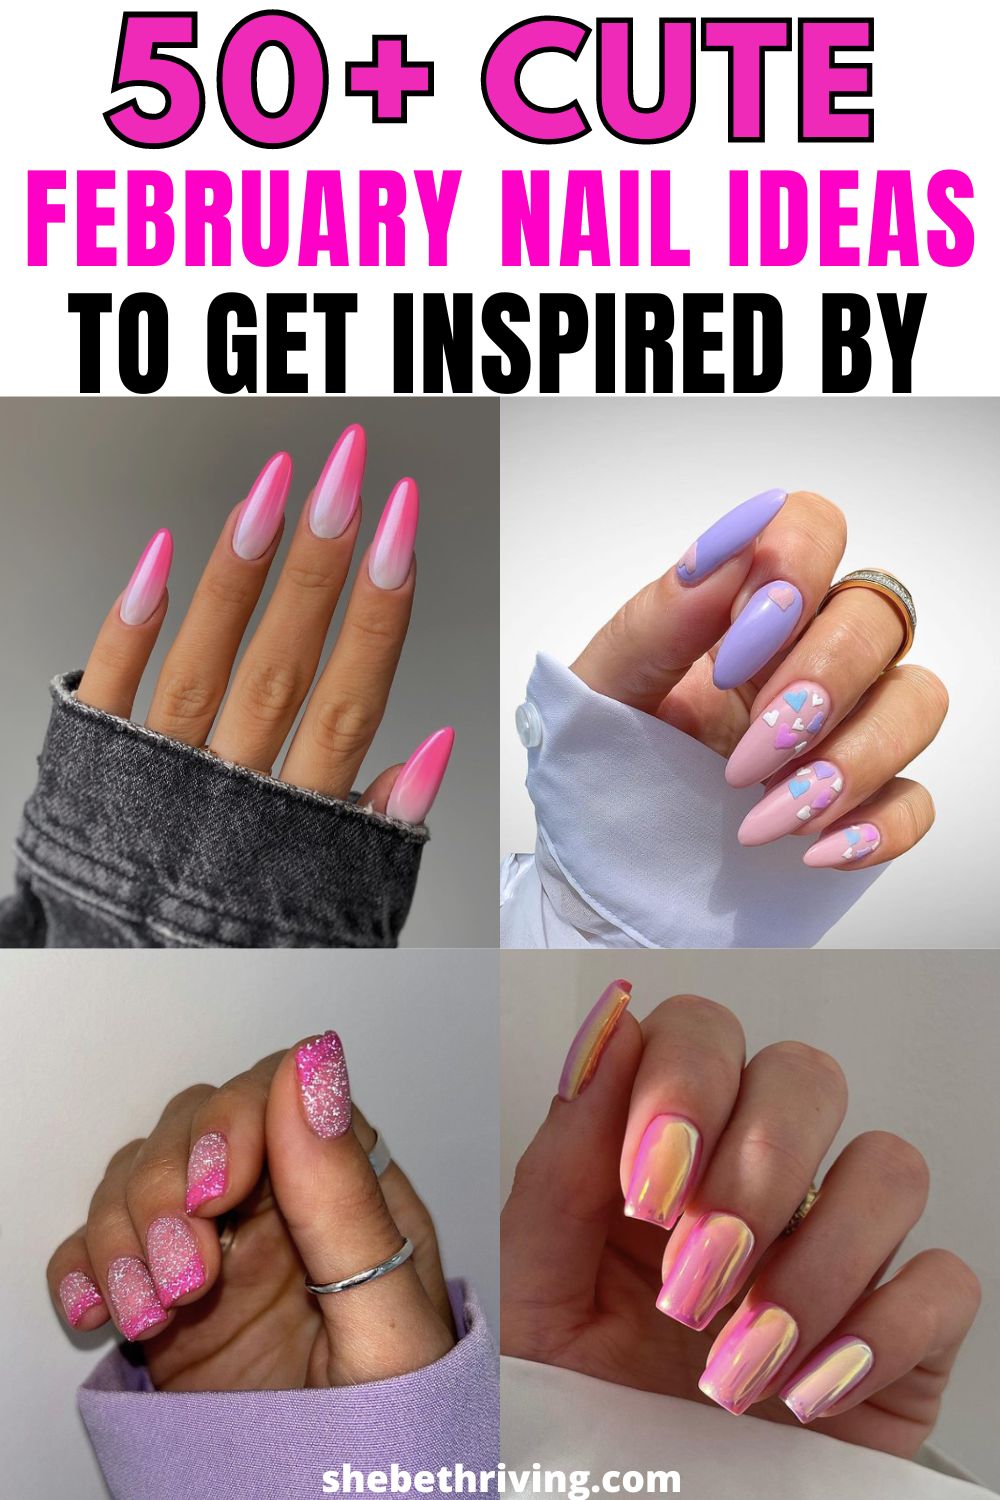 52 Cute February Nails Ideas To Steal Your Heart